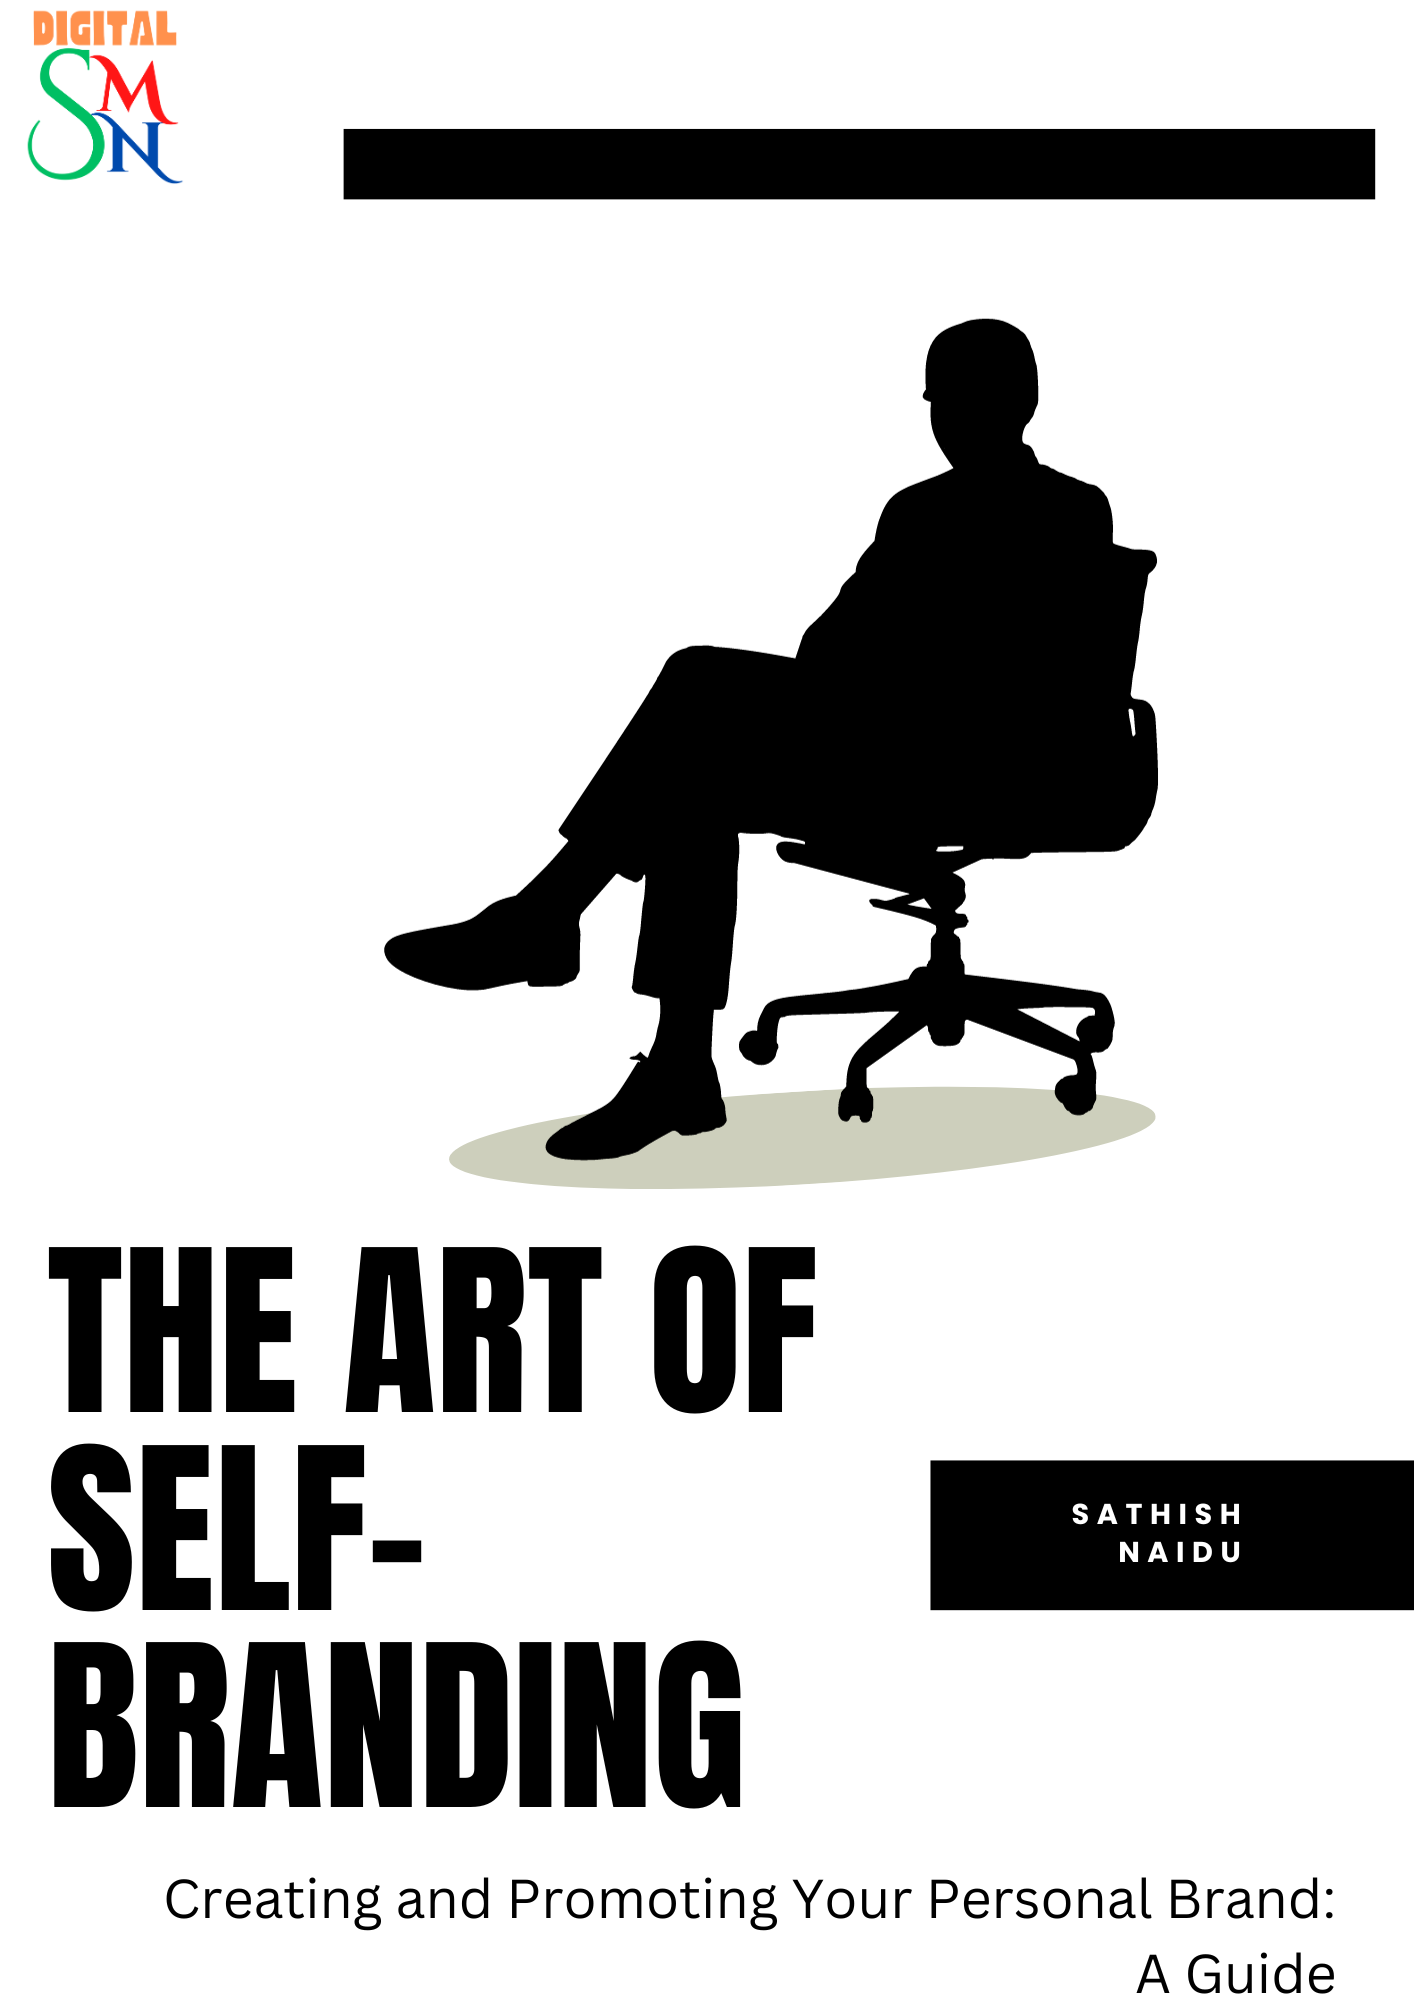 The Art of Self-Branding: How to Create and Promote Your Personal Brand?